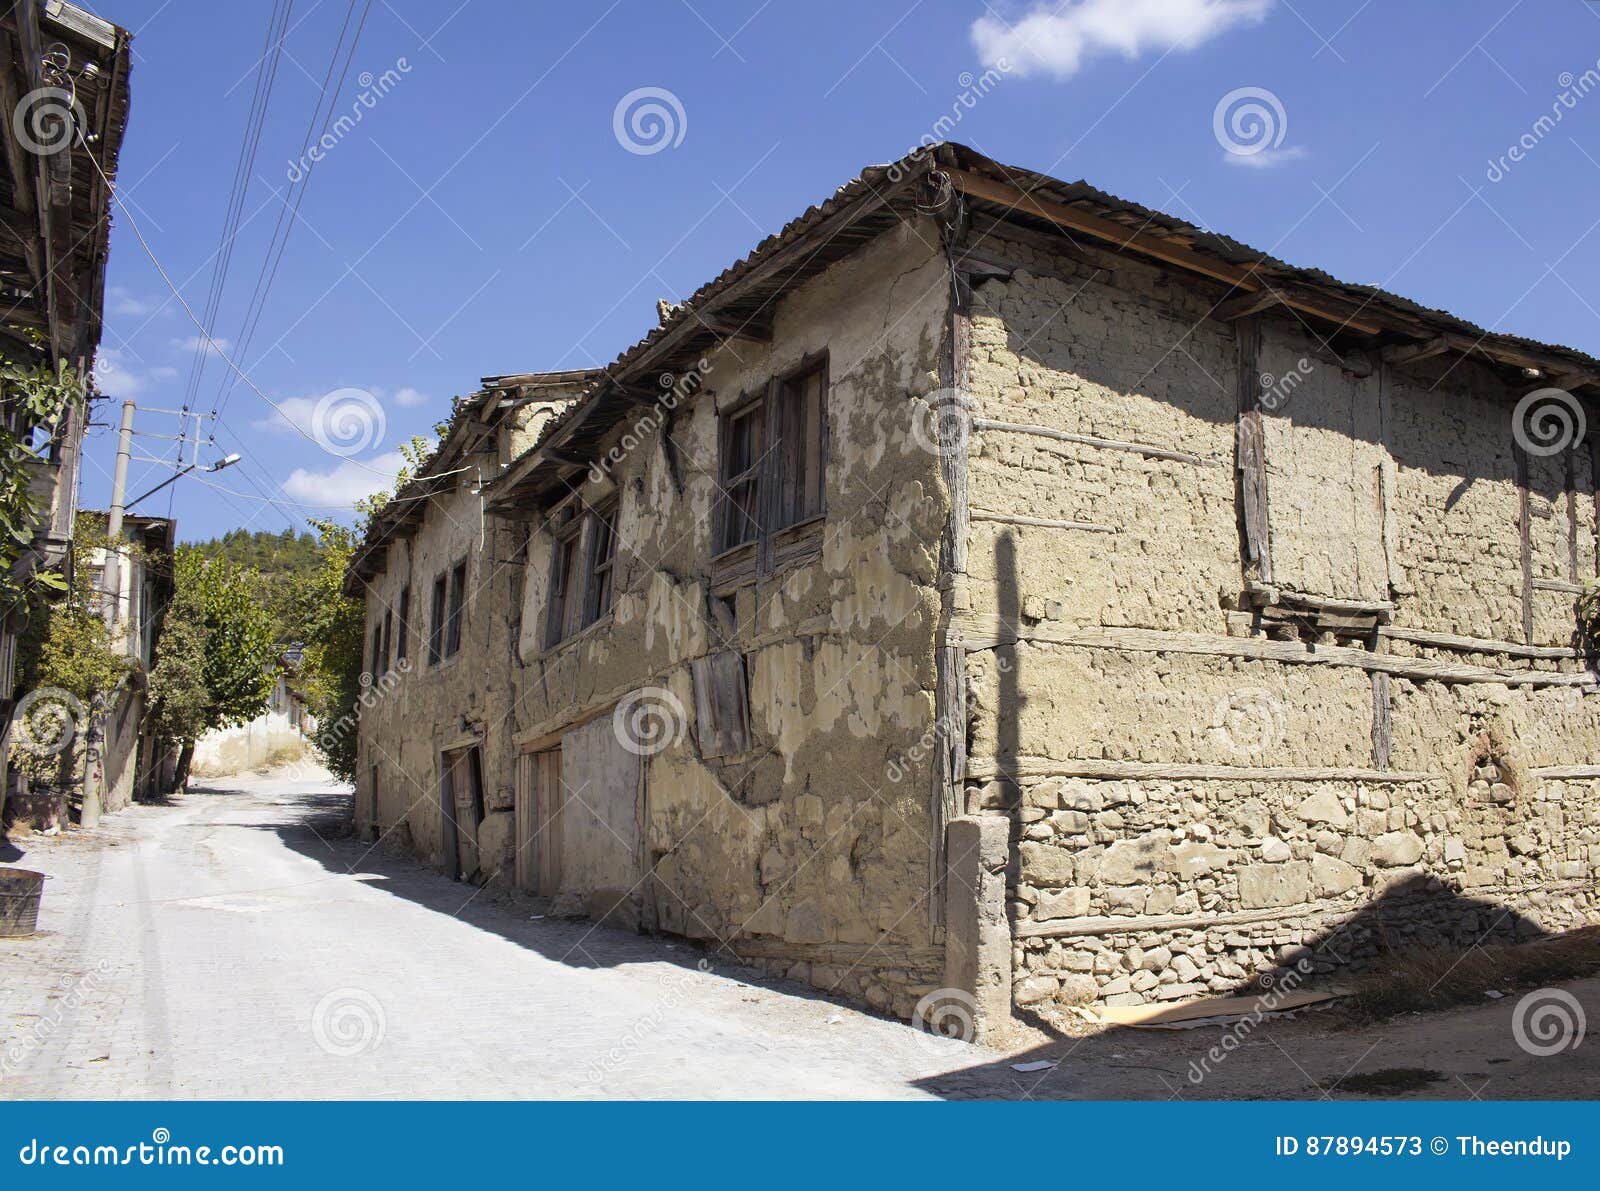 Traditional, Old and Historical Anatolian House Stock Image - Image of ...